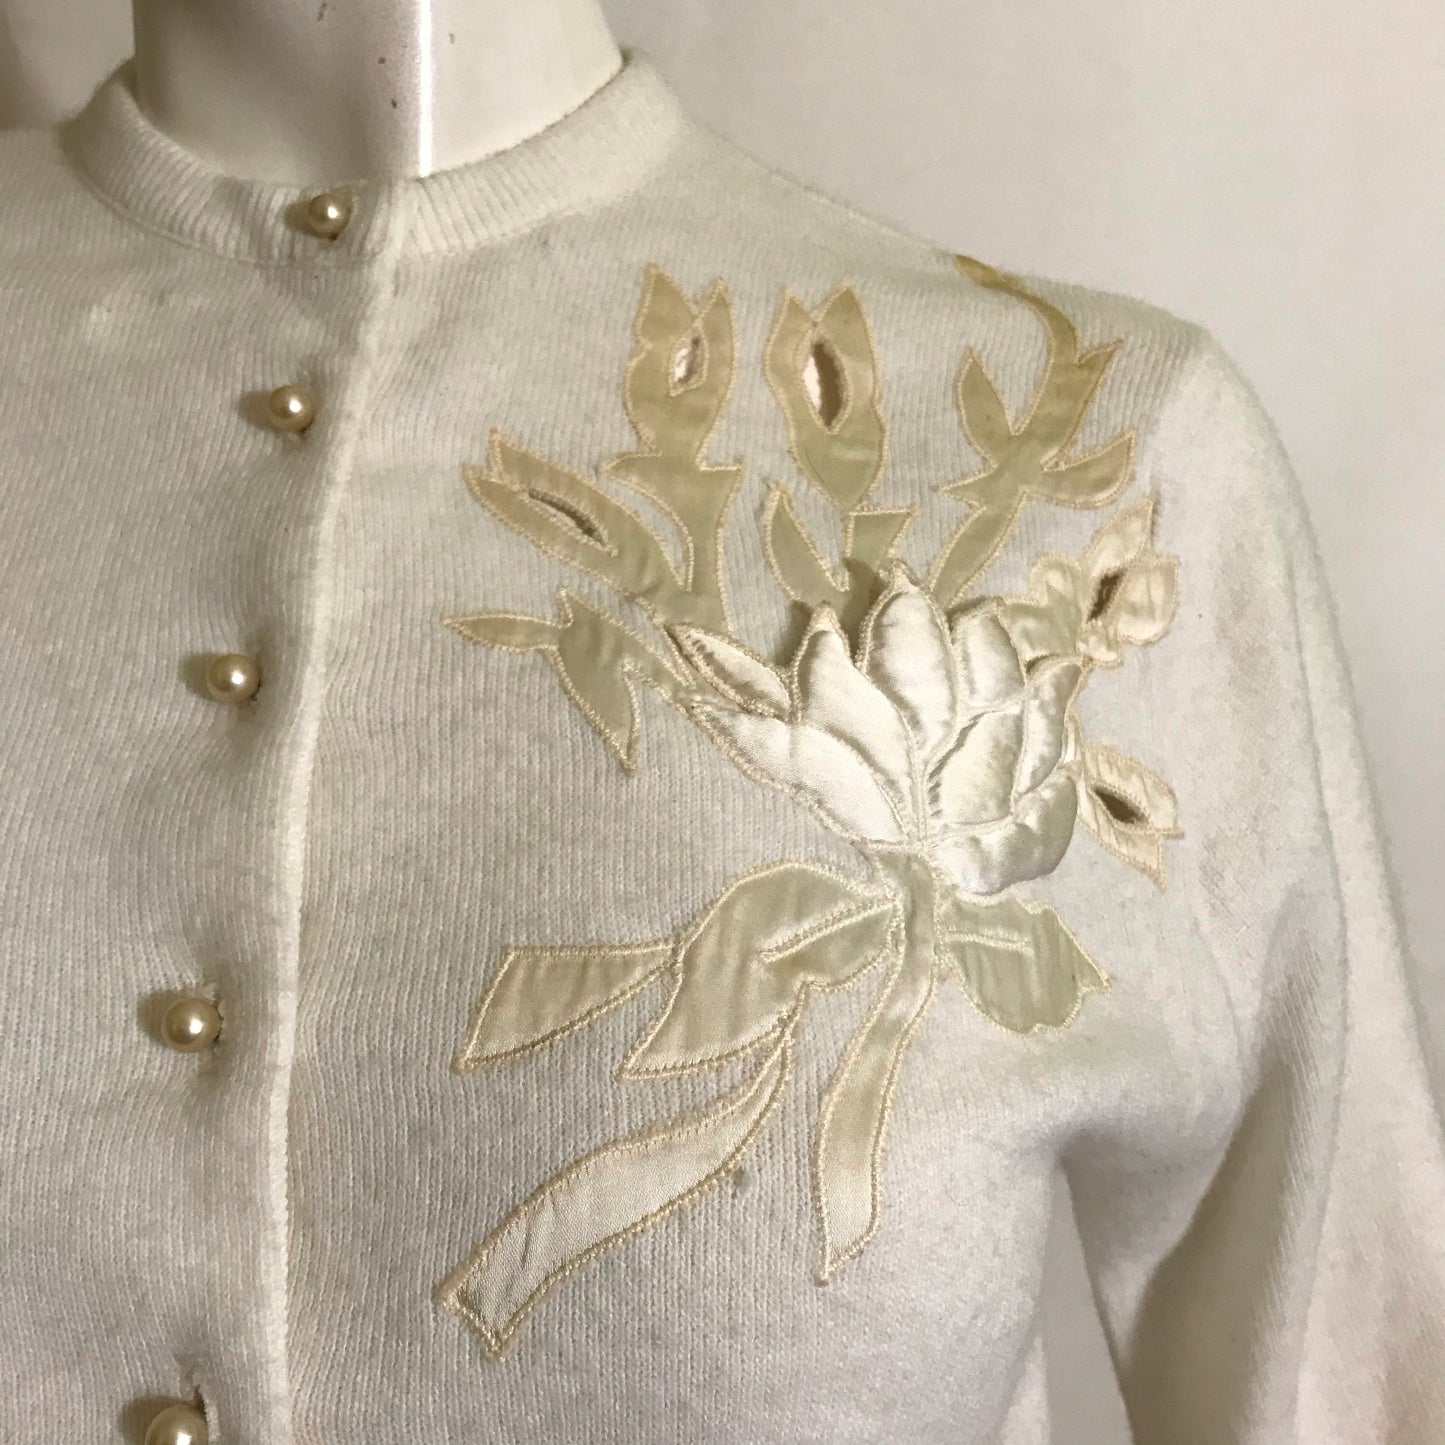 Satin Cutwork Floral Accented Ivory Cardigan Sweater circa 1950s